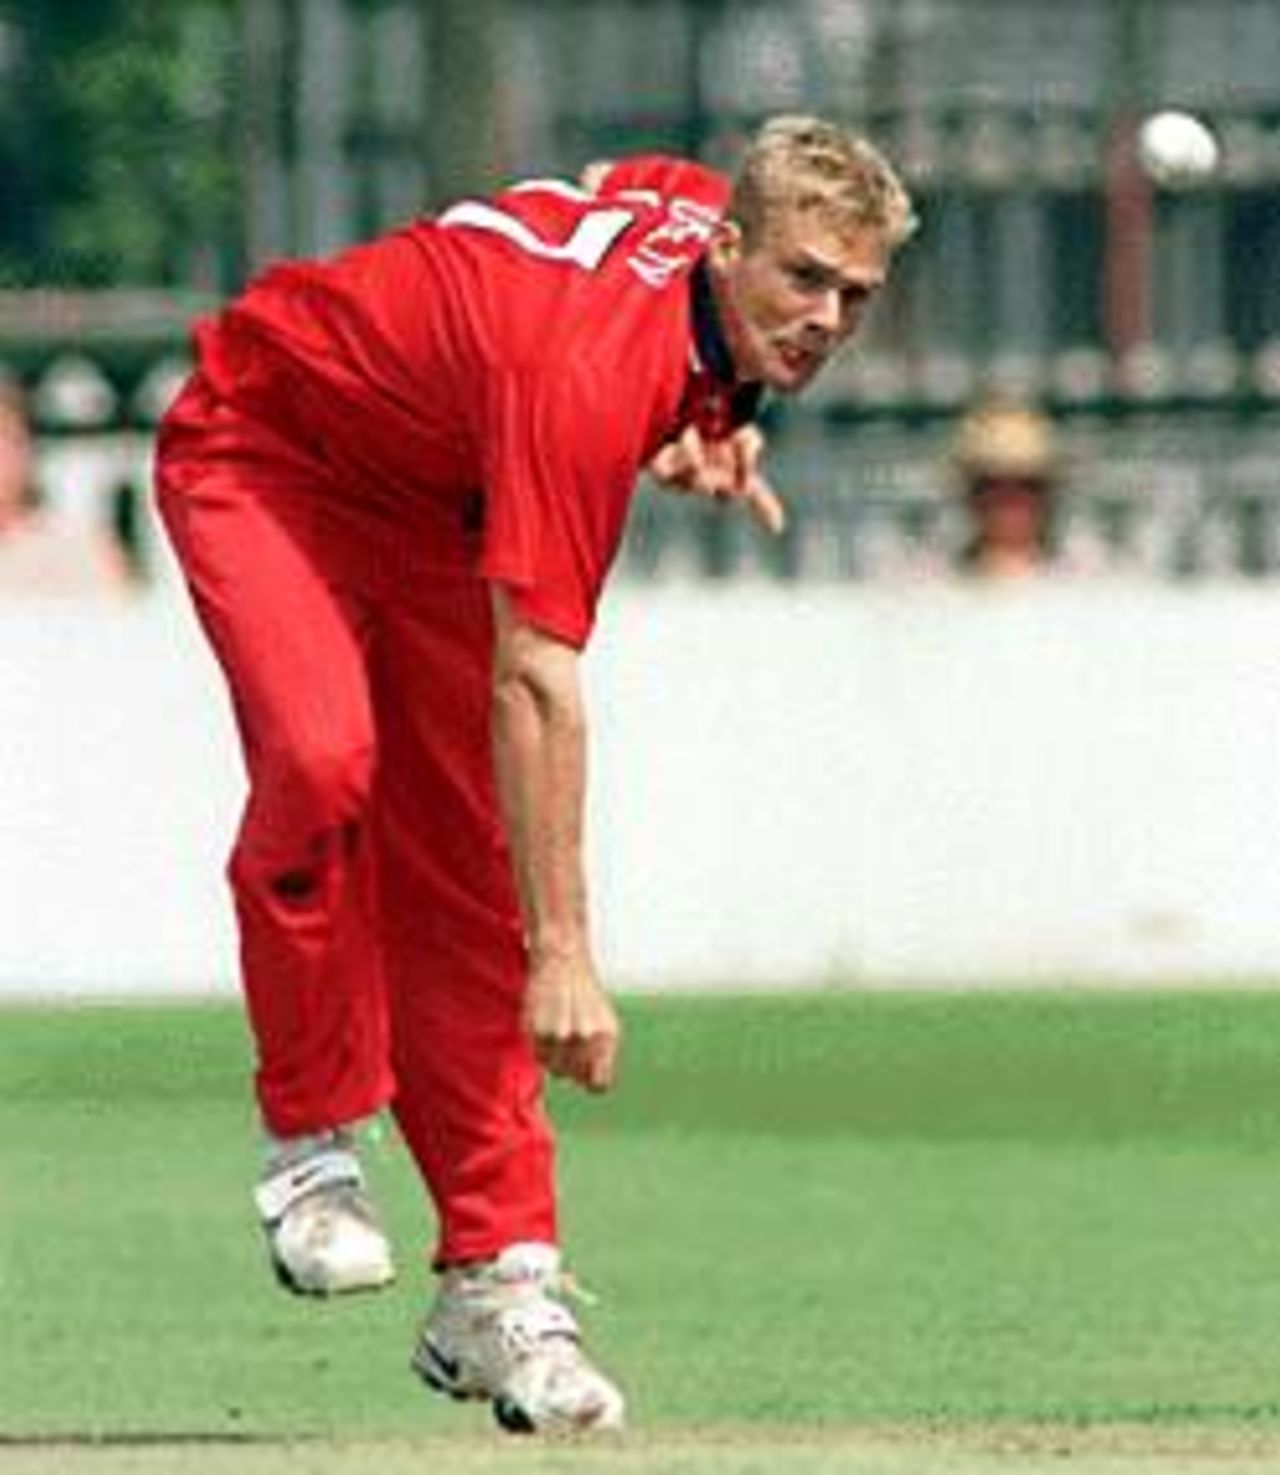 Richard Green in his delivery stride, Gloucestershire v Lancashire, National League 1st Division, 3 May 1999